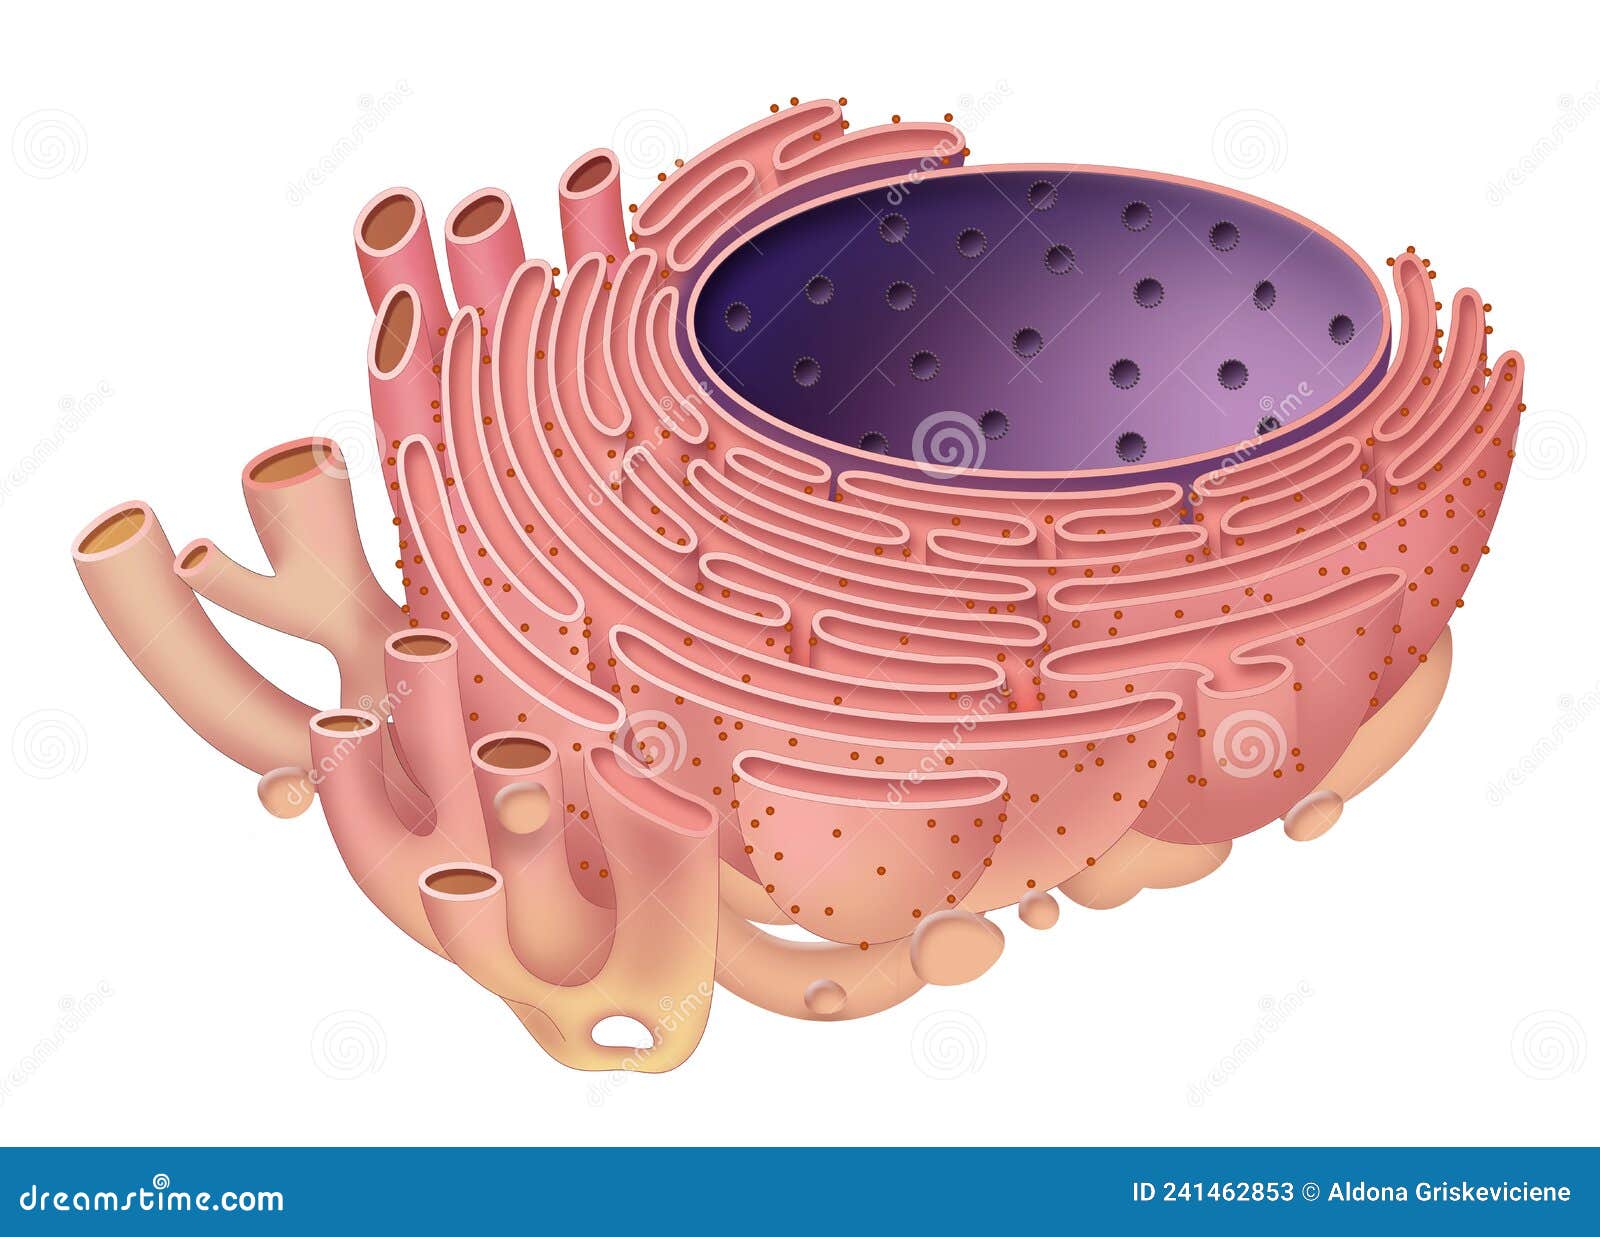 the endoplasmic reticulum is a type of organelle mad Ã¢â¬â rough endoplasmic, and smooth endoplasmic reticulum